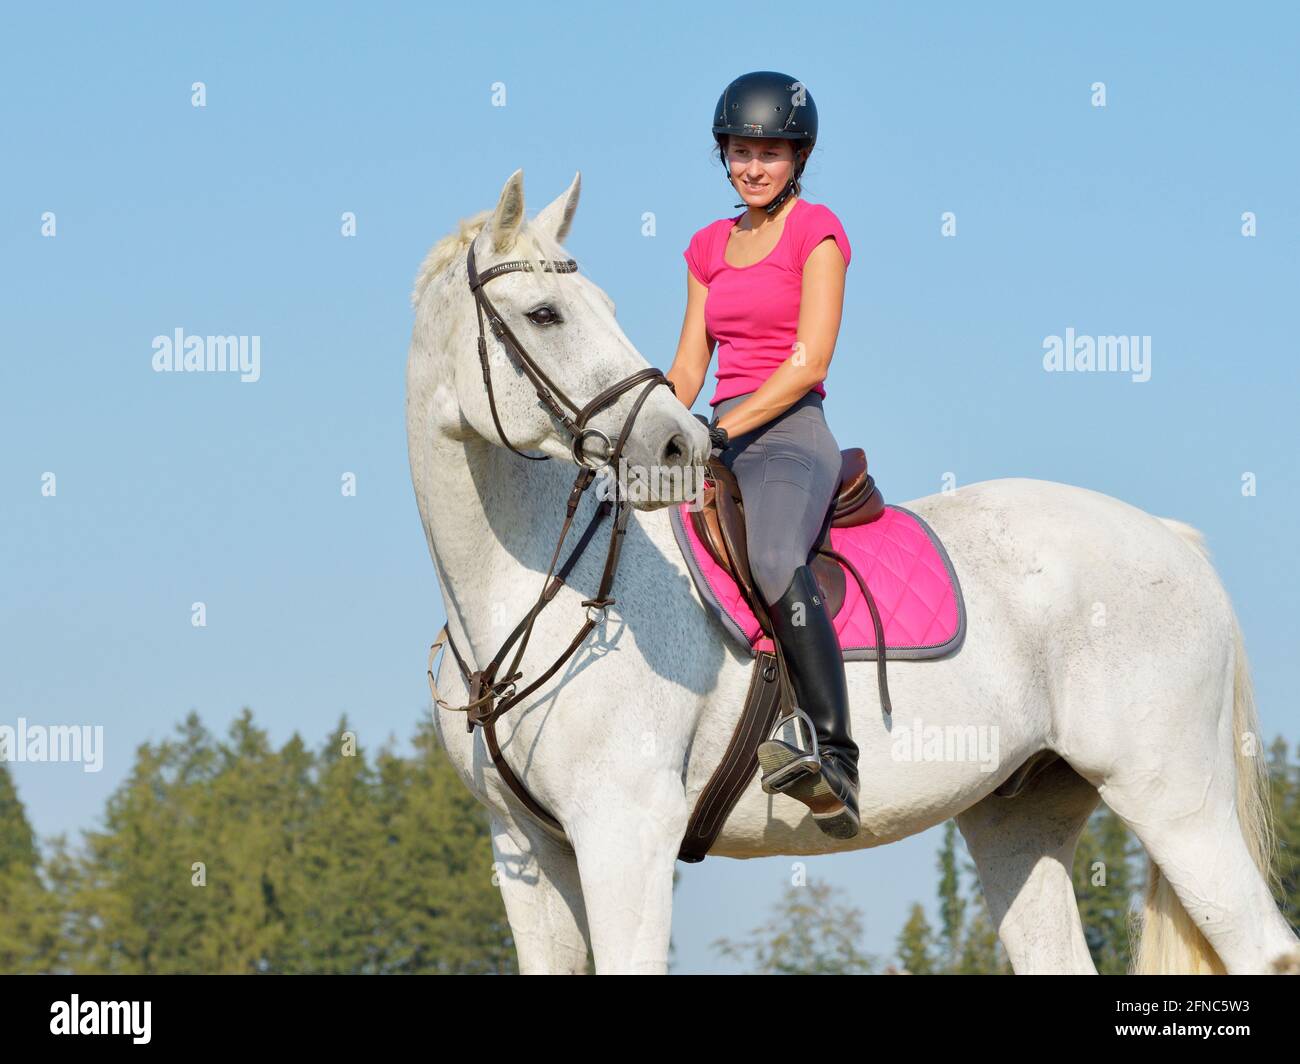 Rider on back of a Bavarian horse Stock Photo